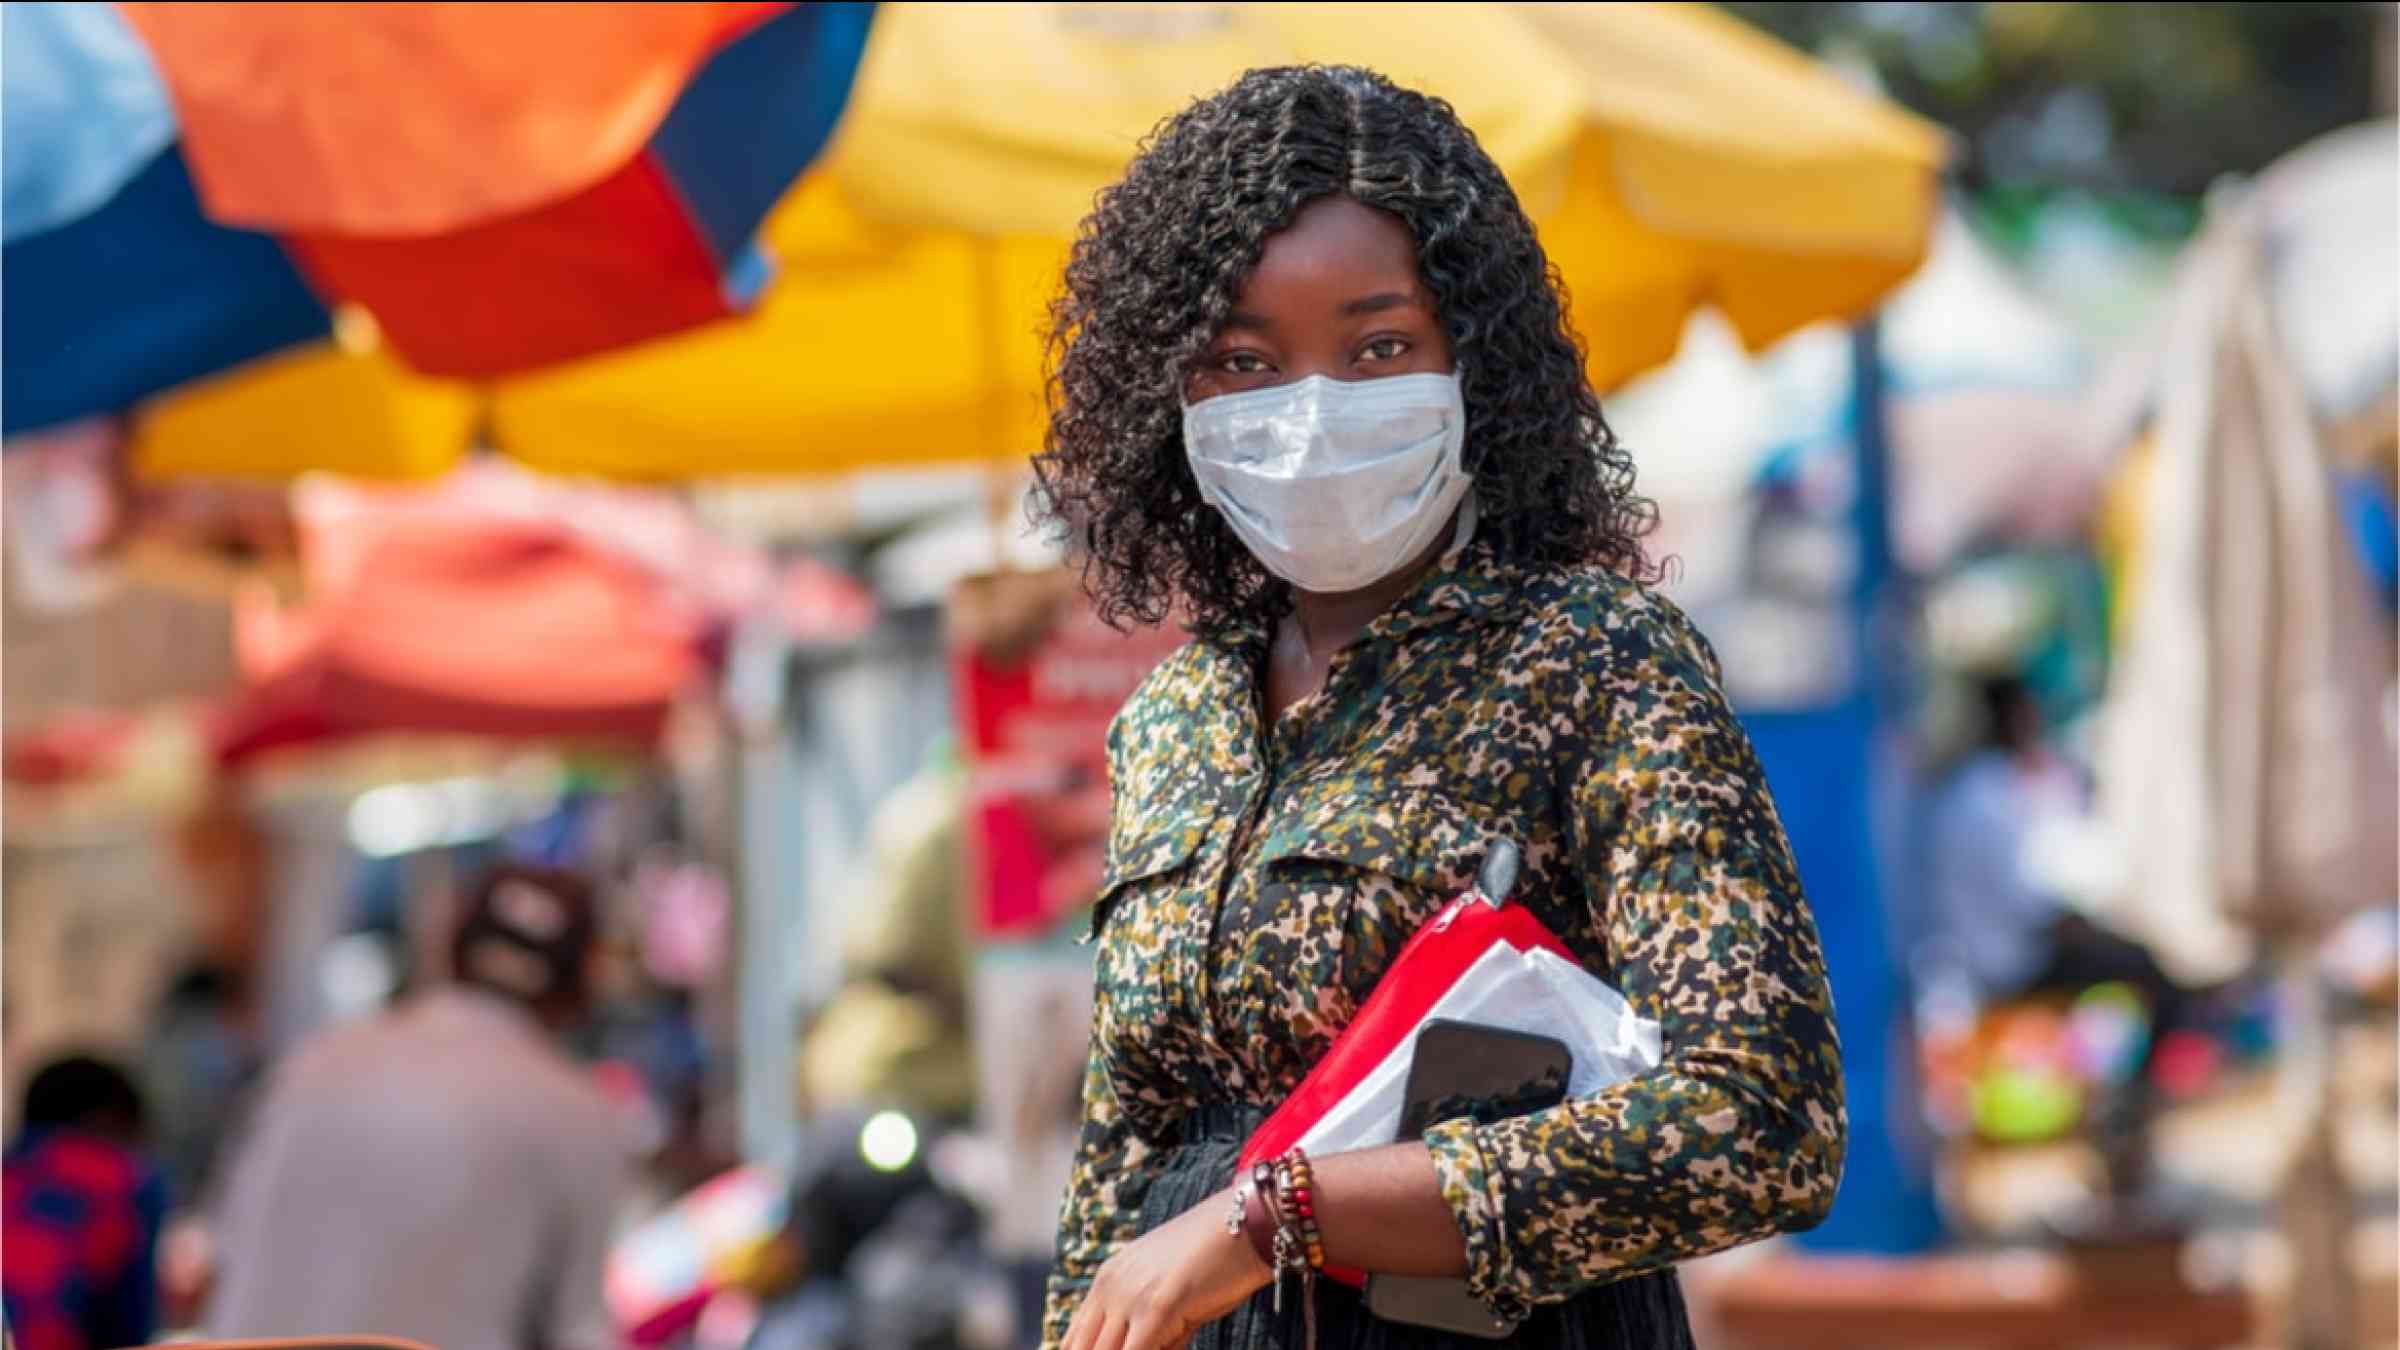 AN African woman wearing a face mask to protect her from COVID-19. She is walking across a market.